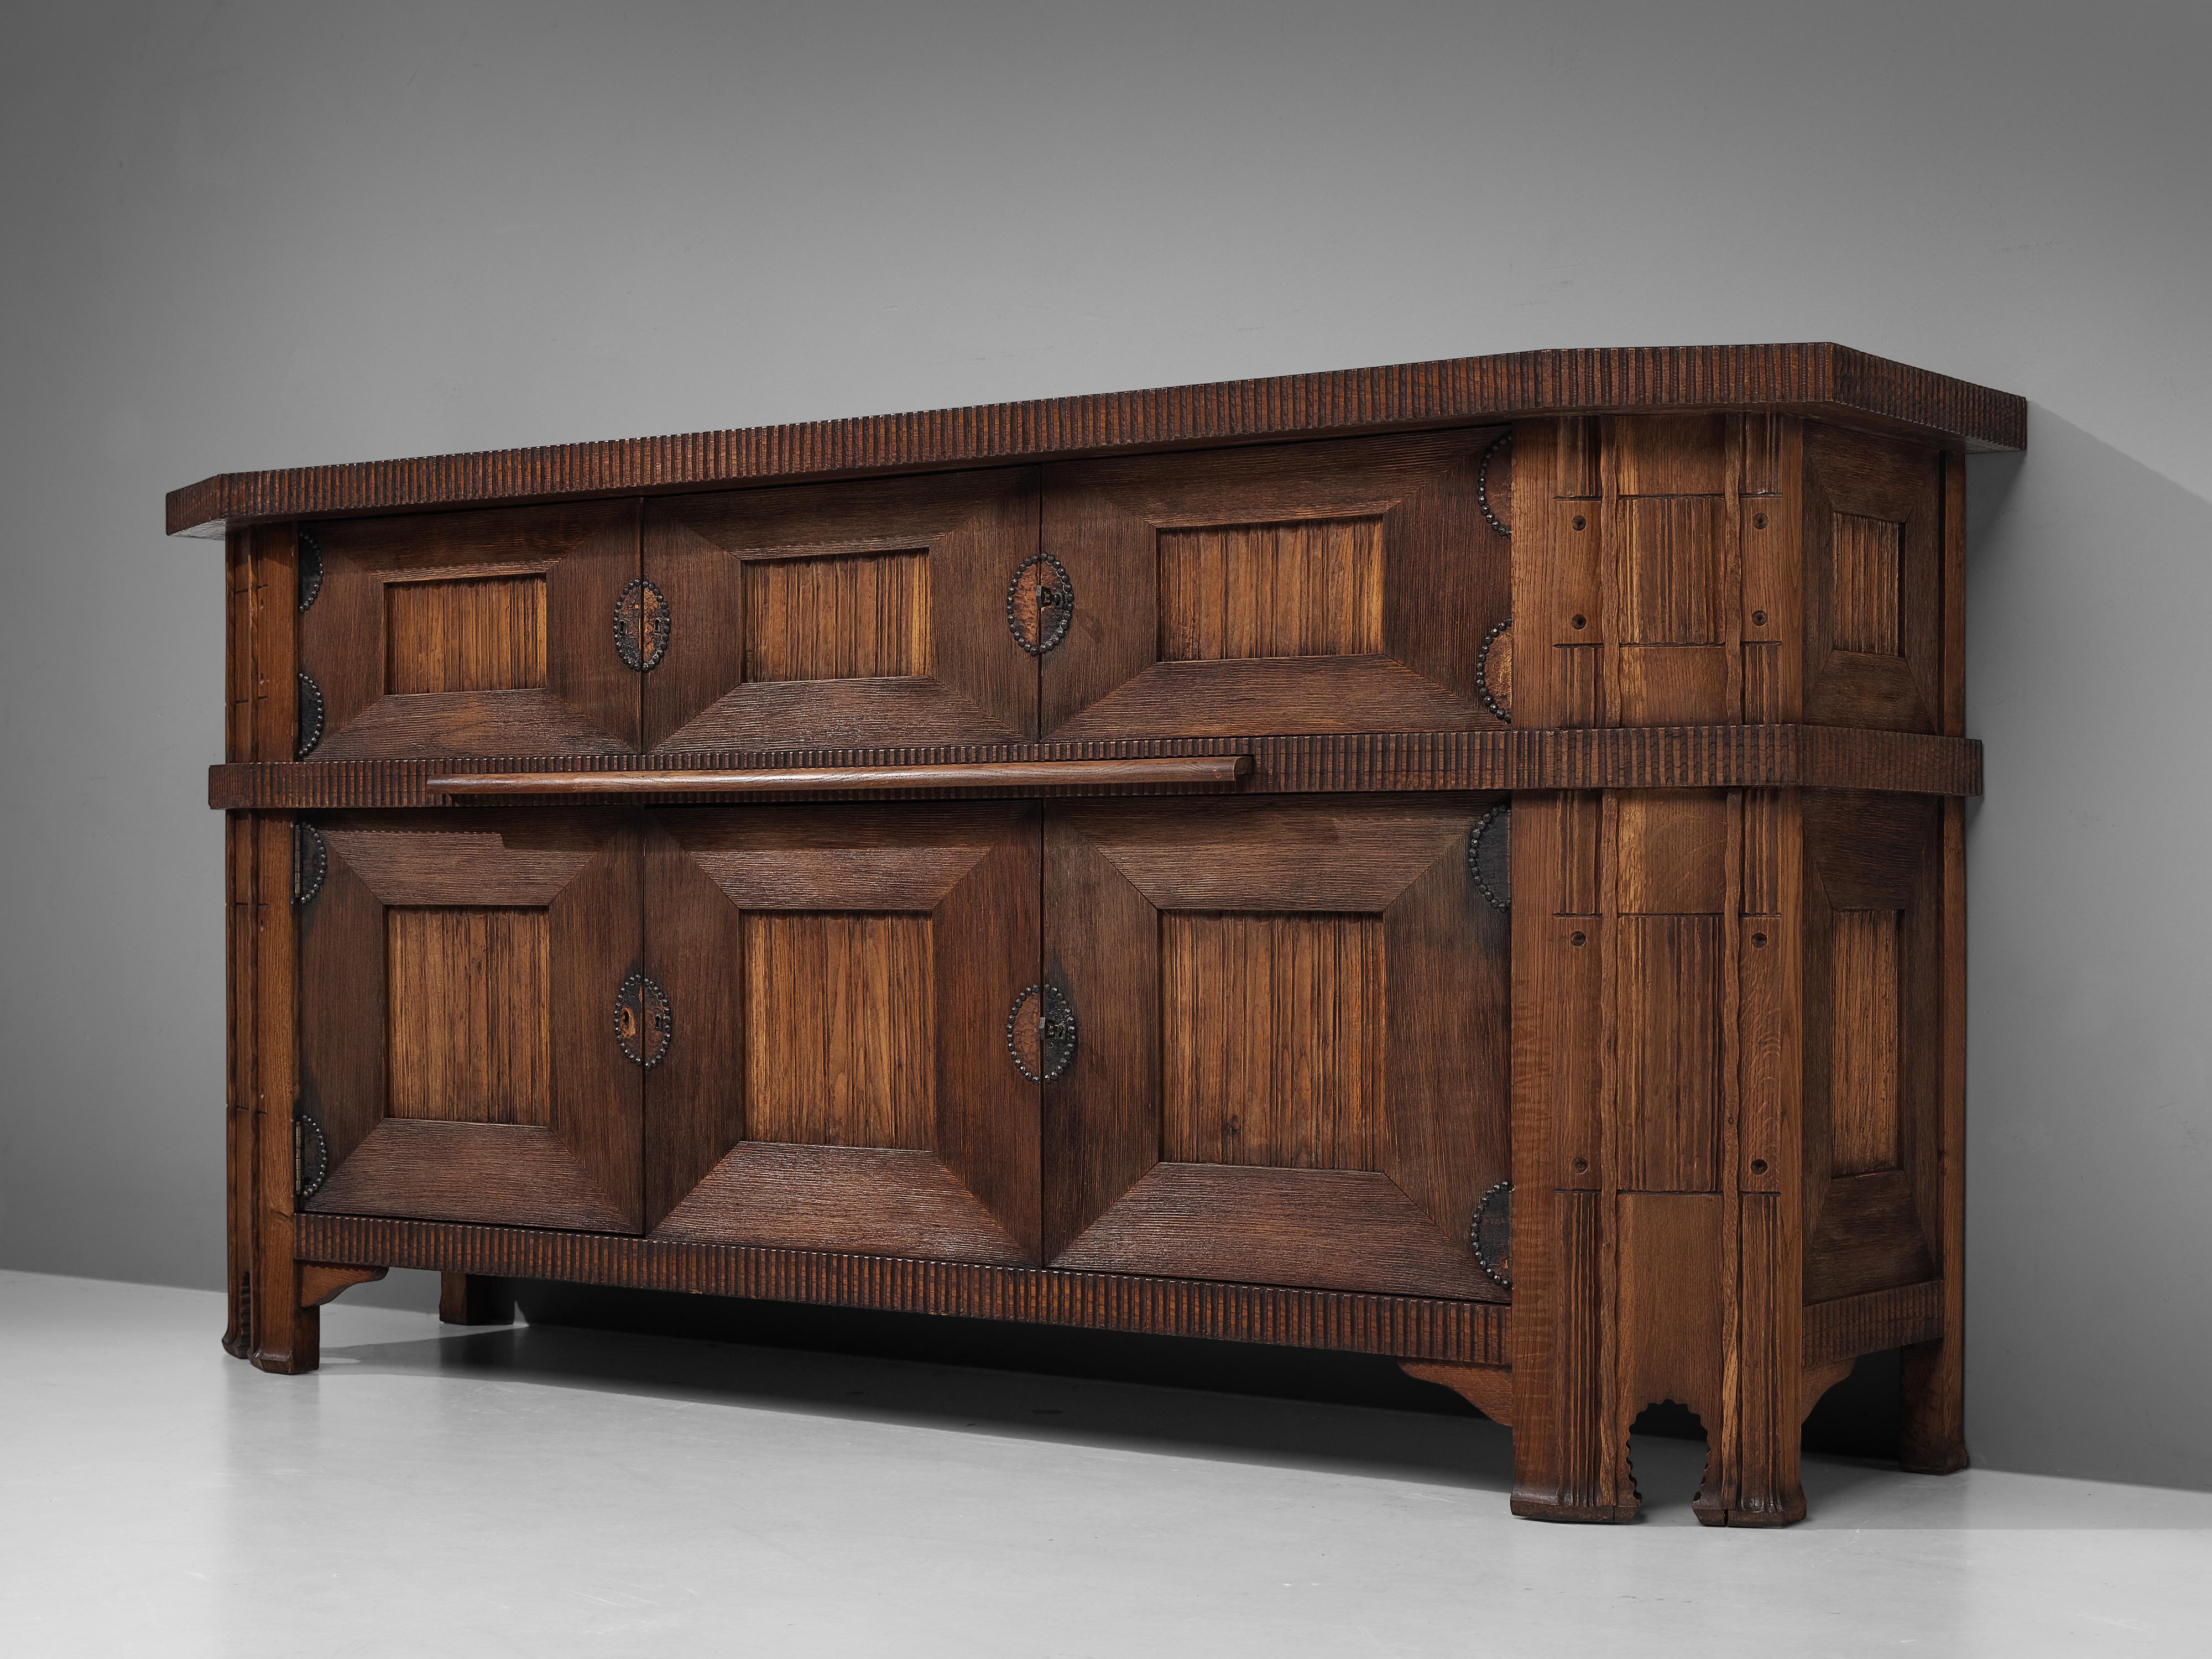 Ernesto Valabrega, sideboard, oak, Italy, 1930s.

This large Art Deco sideboard in oak by Ernesto Valabrega features not only visual qualities but also great storage space. Six doors are structuring the outside and are furnished with separate